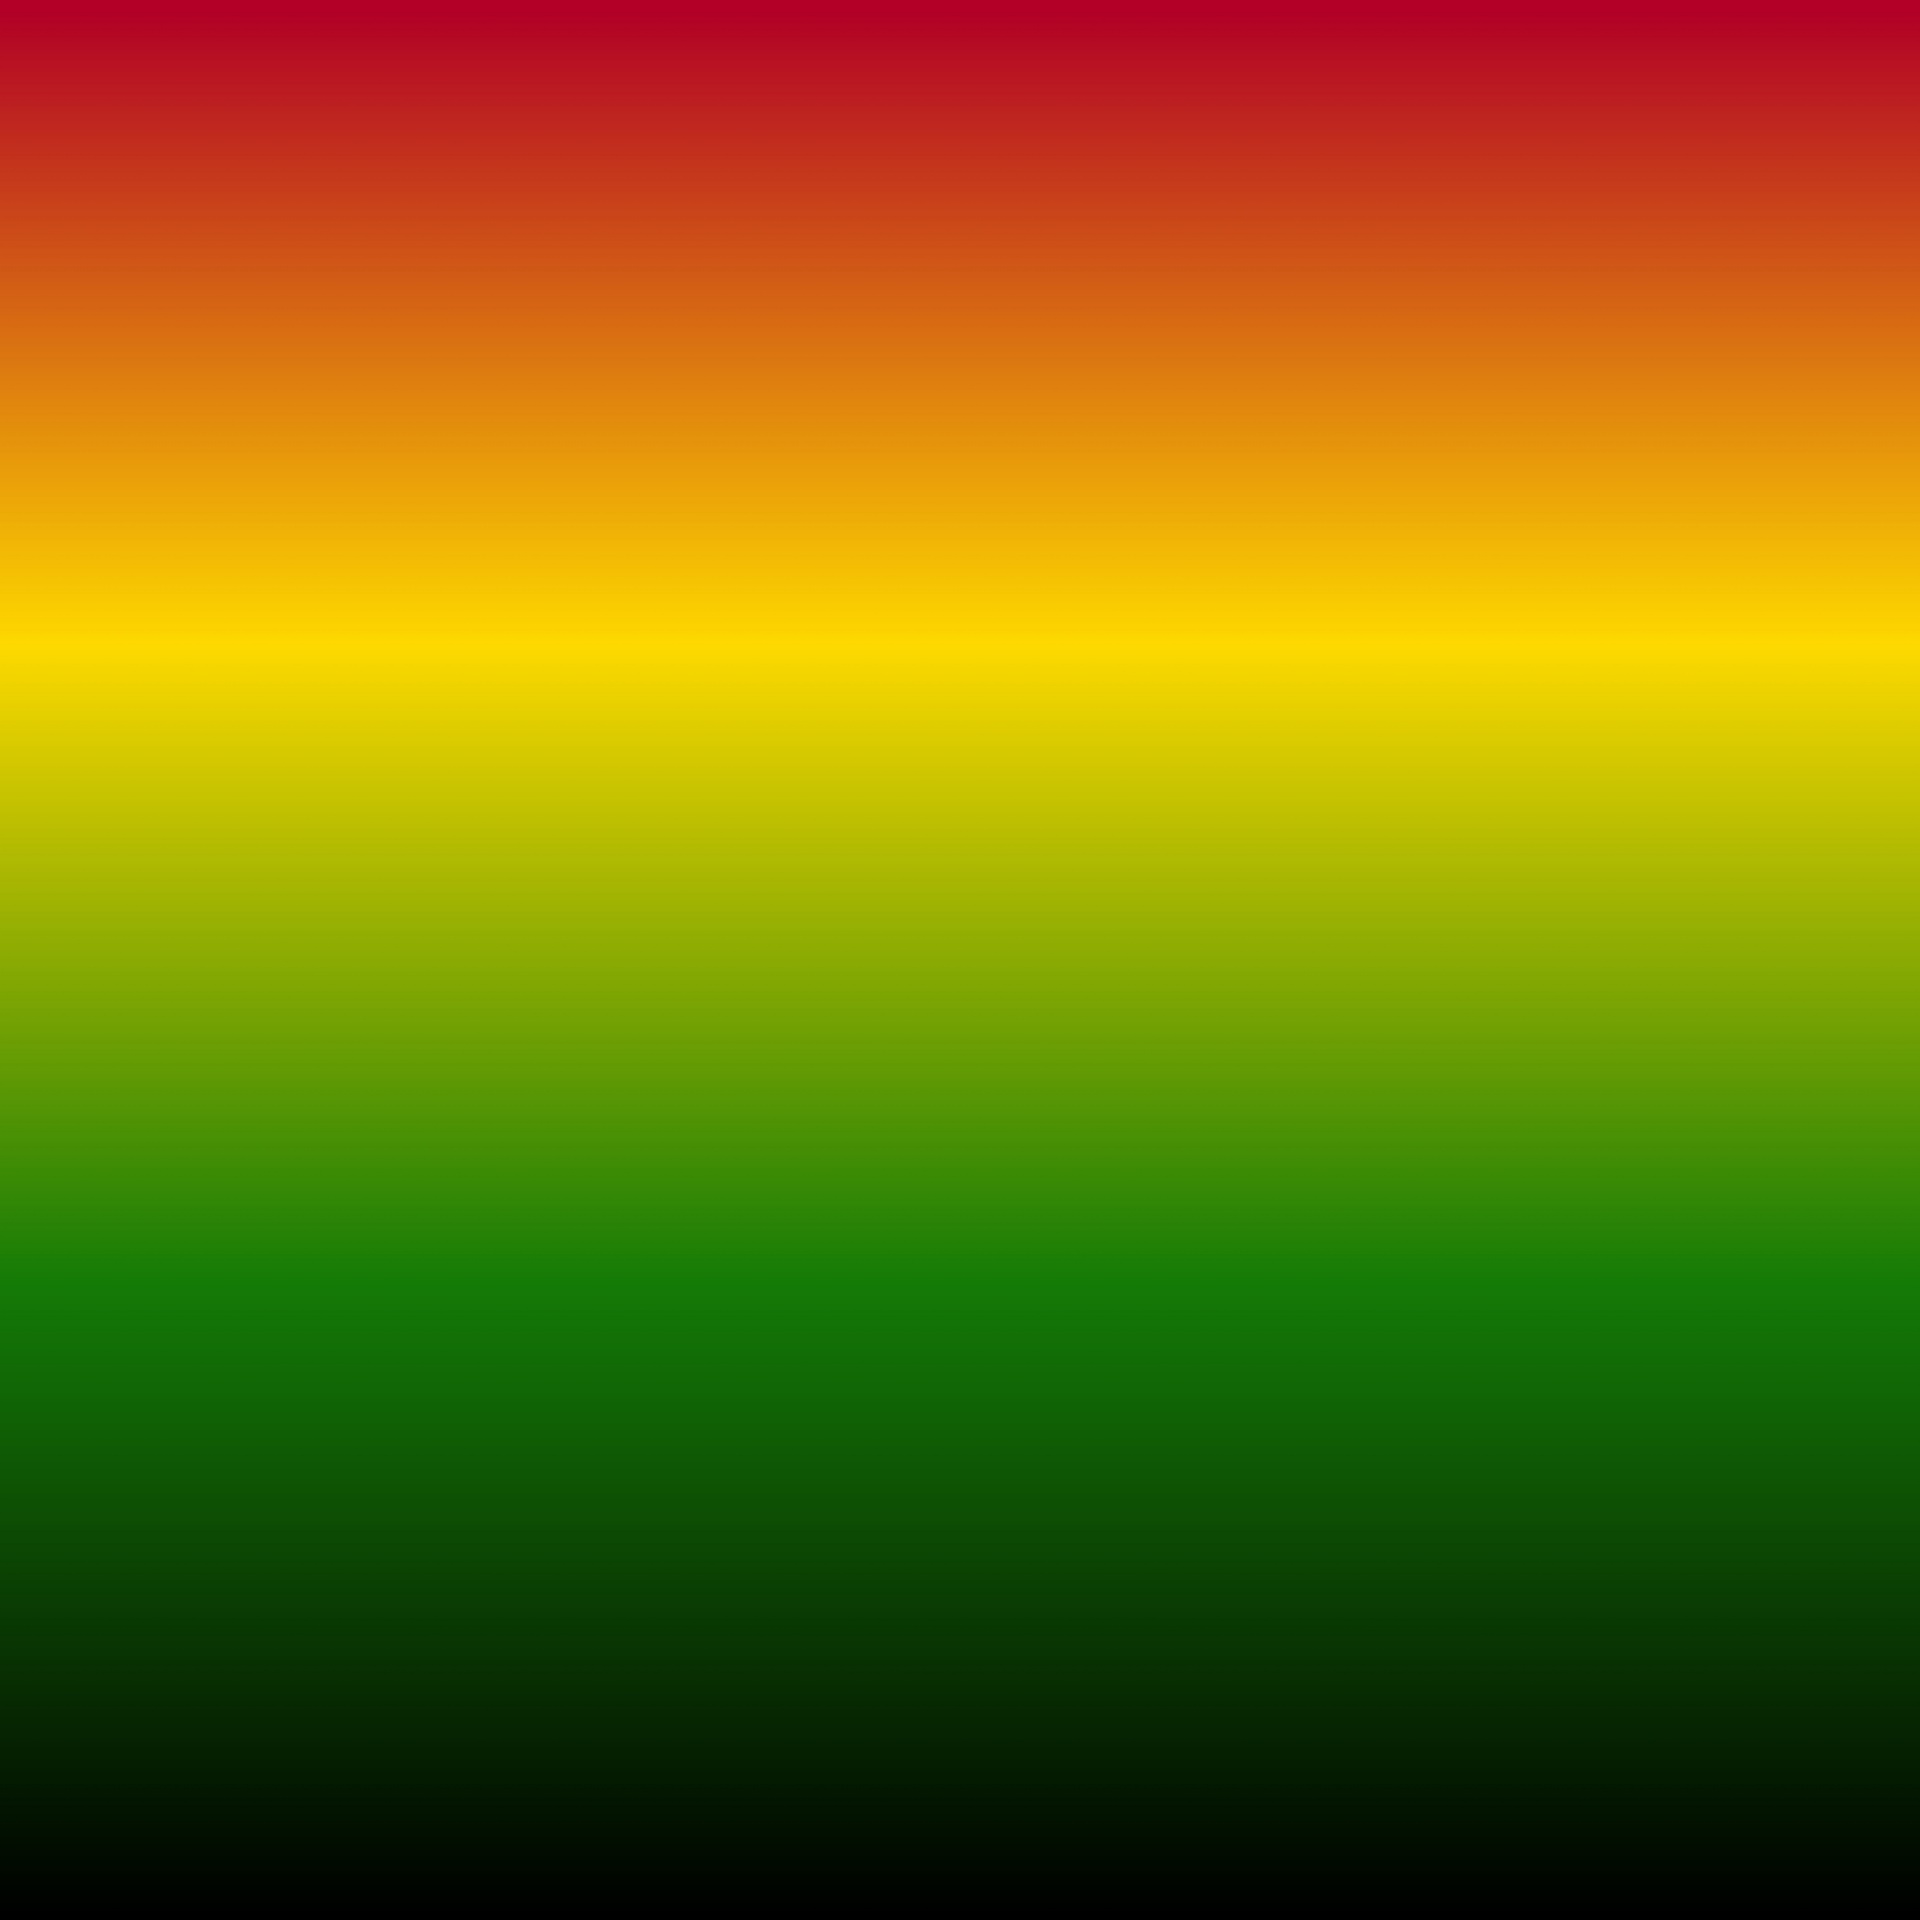 Wallpaper, background, red, yellow, green